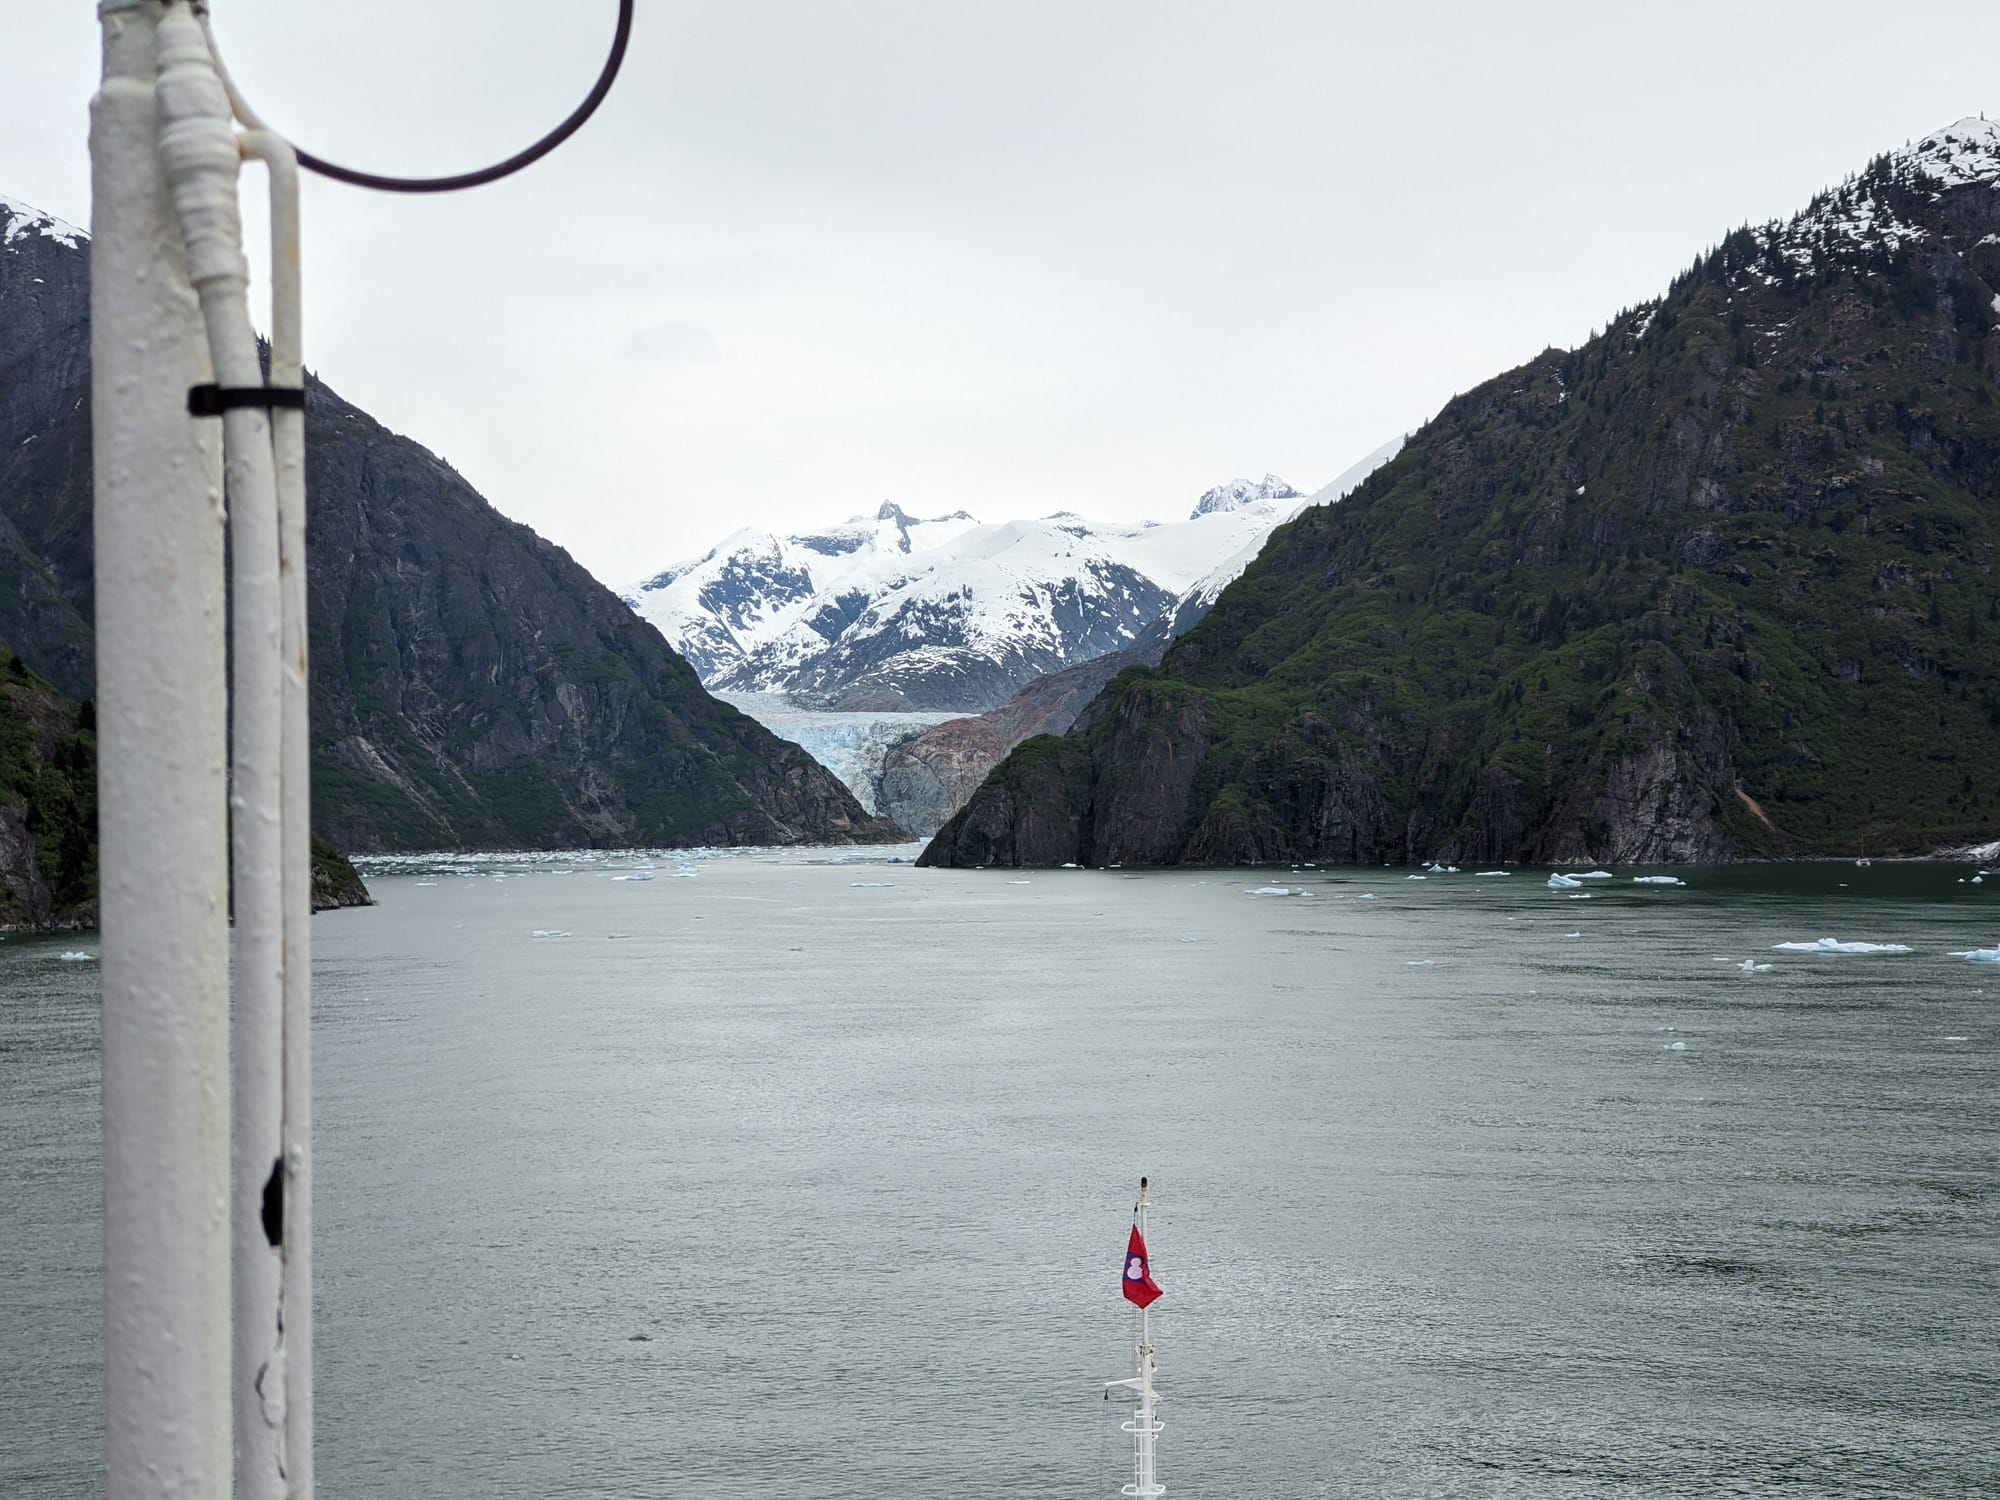 City Guides: Things to do While Boating in Juneau, Alaska